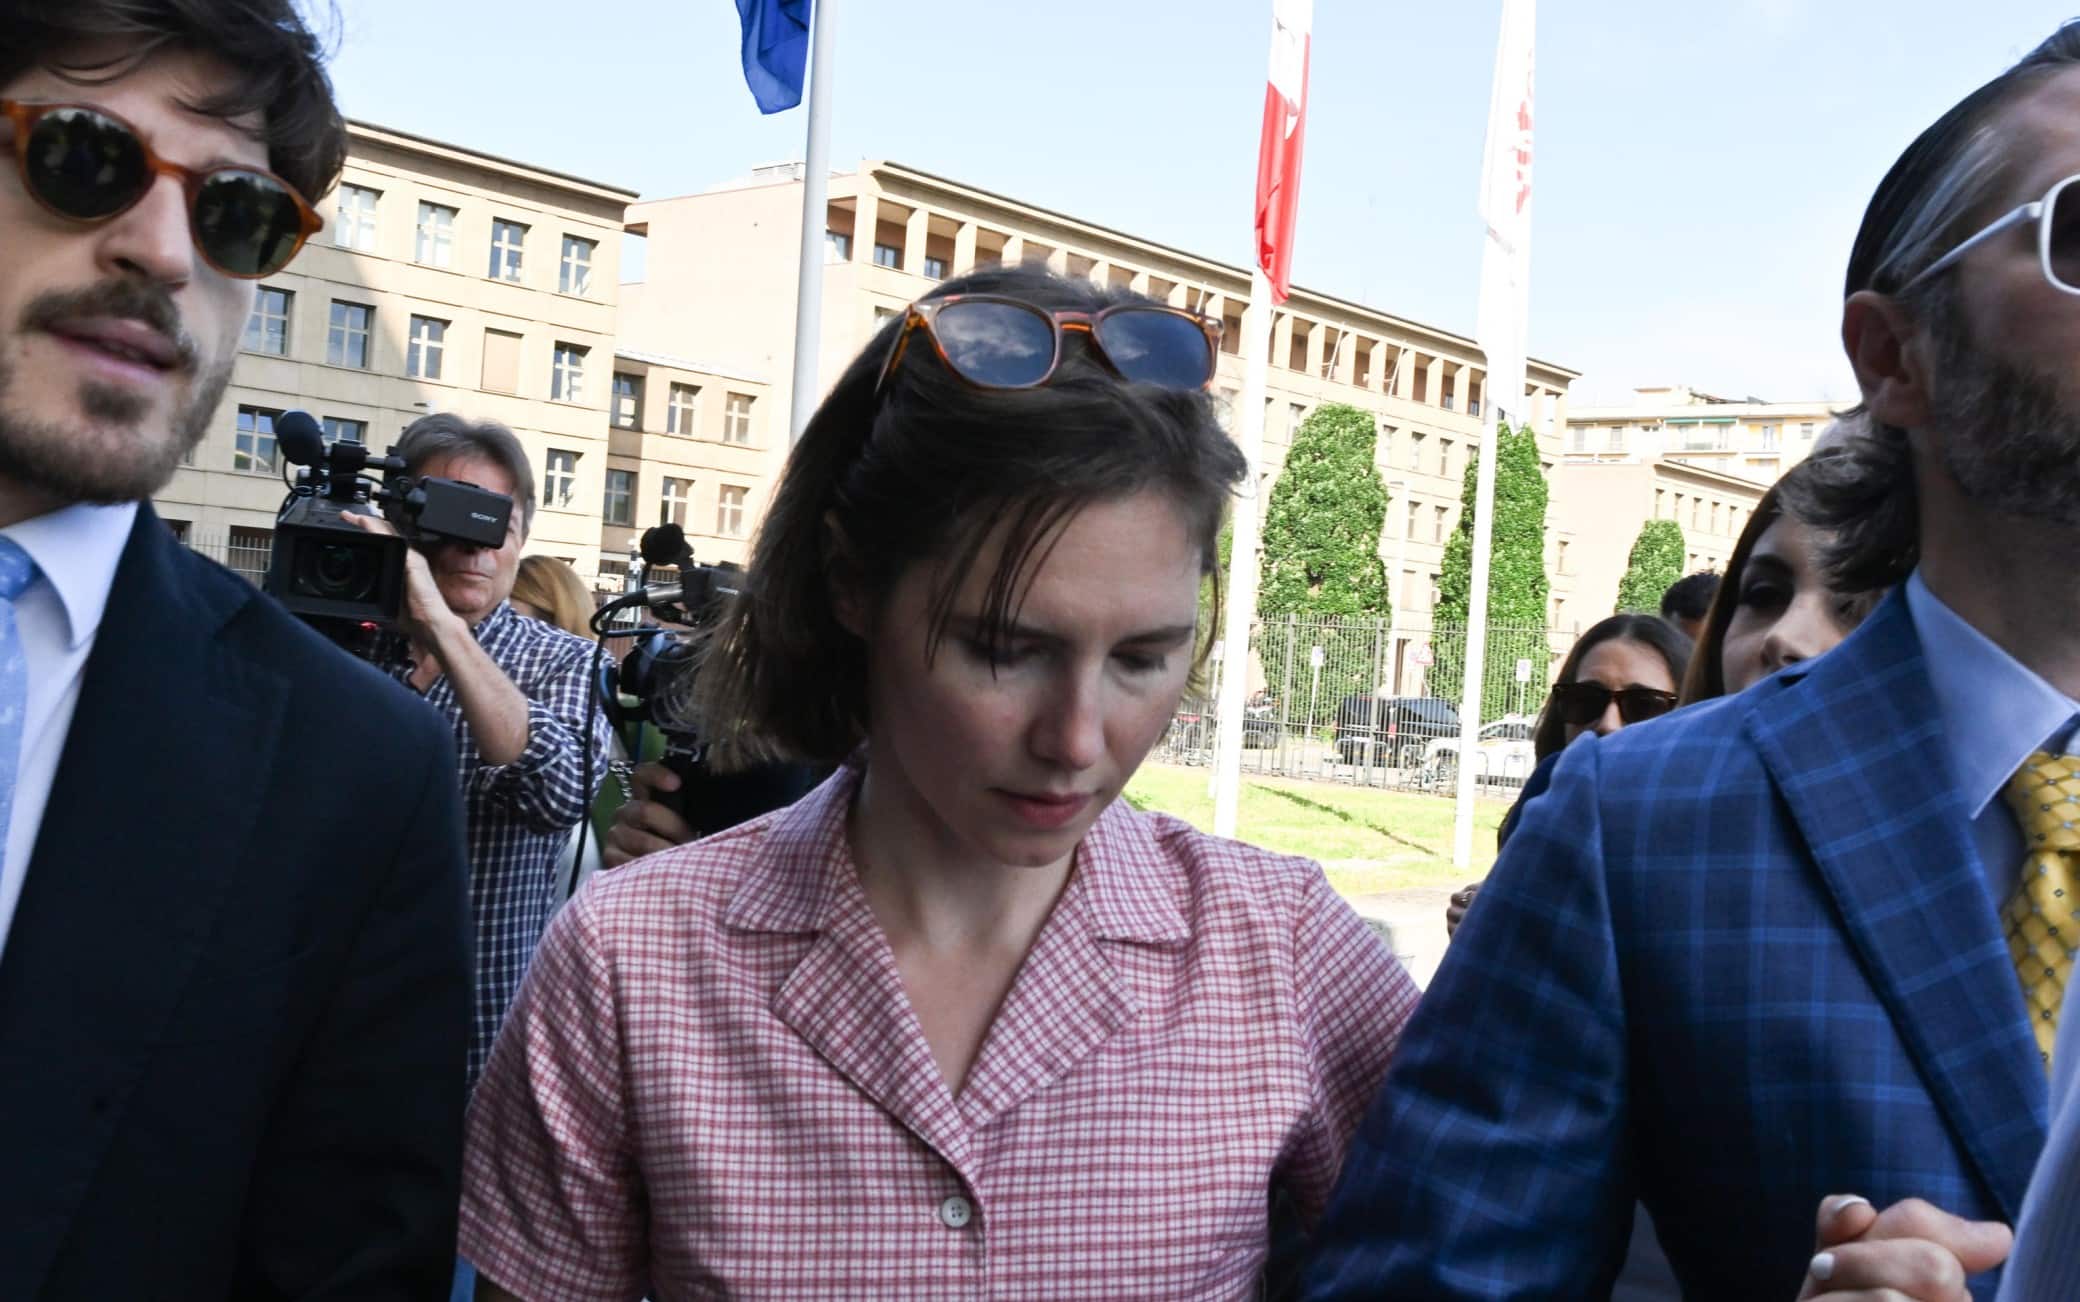 Amanda Knox (C) arriva al Palazzo di Giustizia di Firenze, accompagnata dal marito  Chris Robinson e dagli avvocati,  per partecipare all'udienza davanti alla Corte d'assise d'appello chiamata a stabilire se sia responsabile di calunnia nei confronti di Patrick Lumumba  Firenze, 05 Giugno  2024. //
US Amanda Knox (C), flanked by his husband Chris Robinson (R), arrives at the courthouse before a hearing in a slander case, related to her jailing and later acquittal for the murder of her British roommate in 2007, in Florence, Italy, 5 June 2024  The American was only 20 when she and her Italian then-boyfriend were arrested for the brutal killing of 21-year-old fellow student Meredith Kercher at the girls' shared home in Perugia. The murder began a long legal saga where Knox was found guilty, acquitted, found guilty again and finally cleared of all charges in 2015. ANSA/CLAUDIO GIOVANNINI